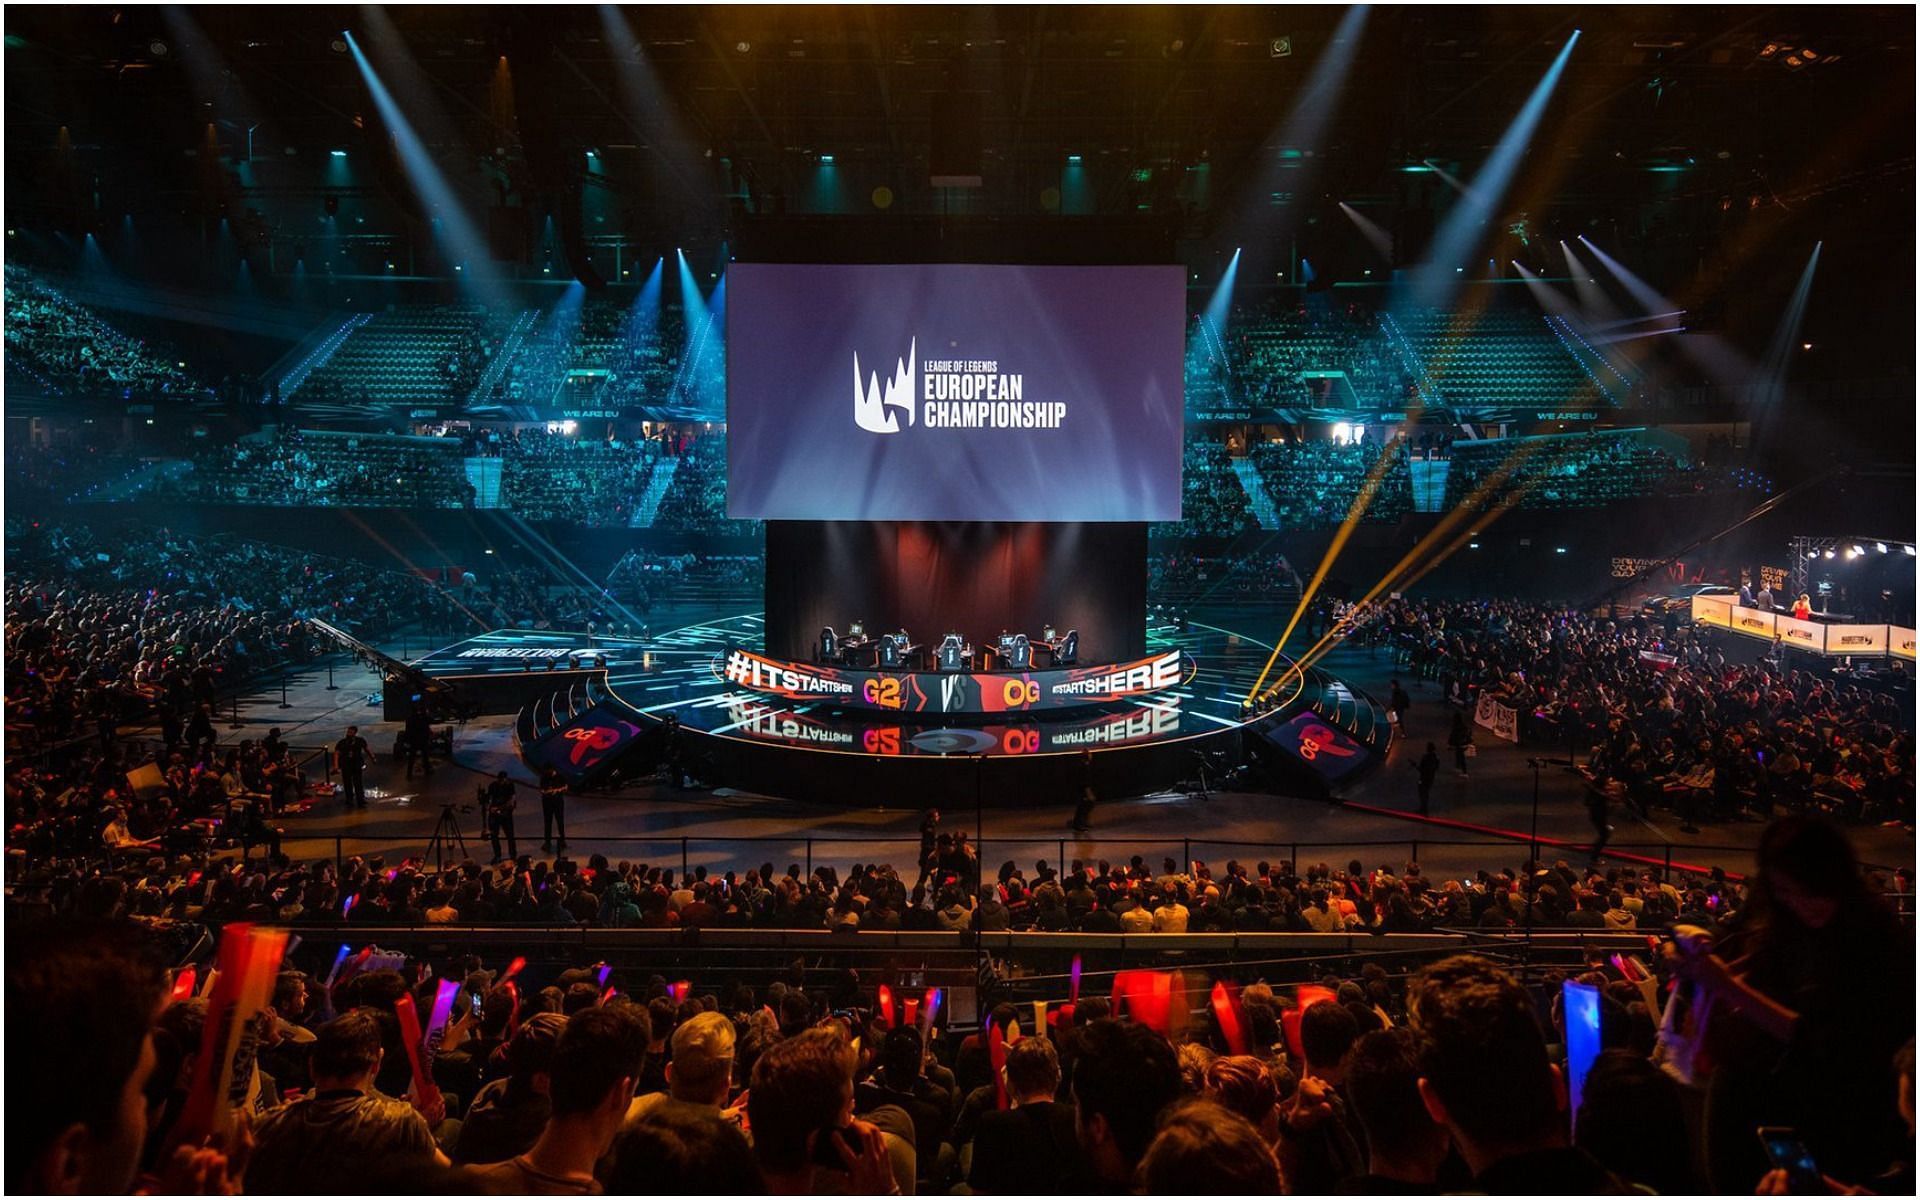 League of Legends LEC is set to conduct matches on stage from week 5